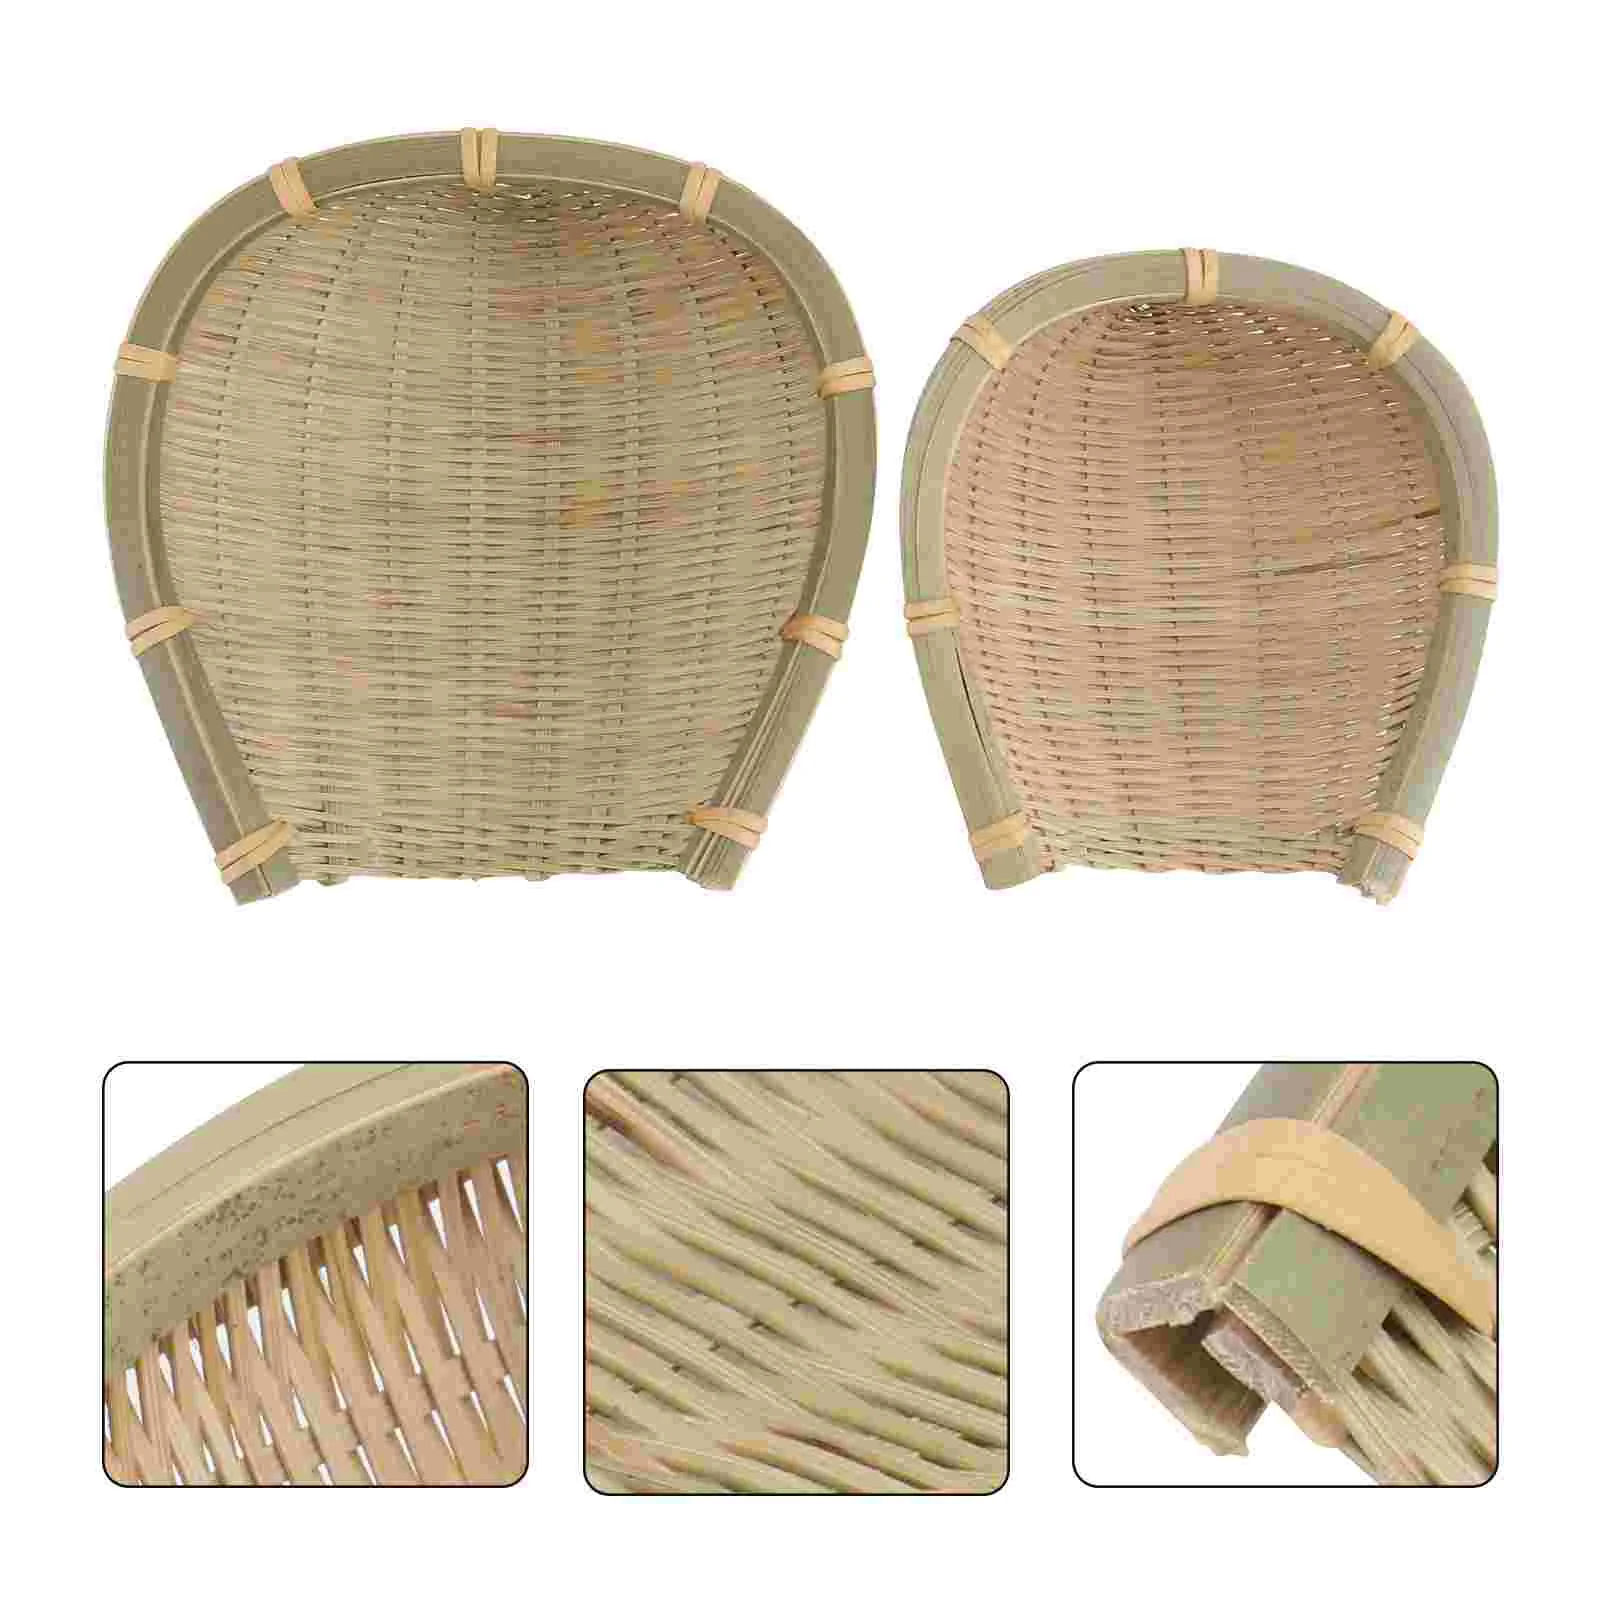 

Basket Storage Fruitfood Serving Baskets Tray Wicker Bread Woven Kitchen Colander Weaving Picnic Bowl Fruits Container Strainer